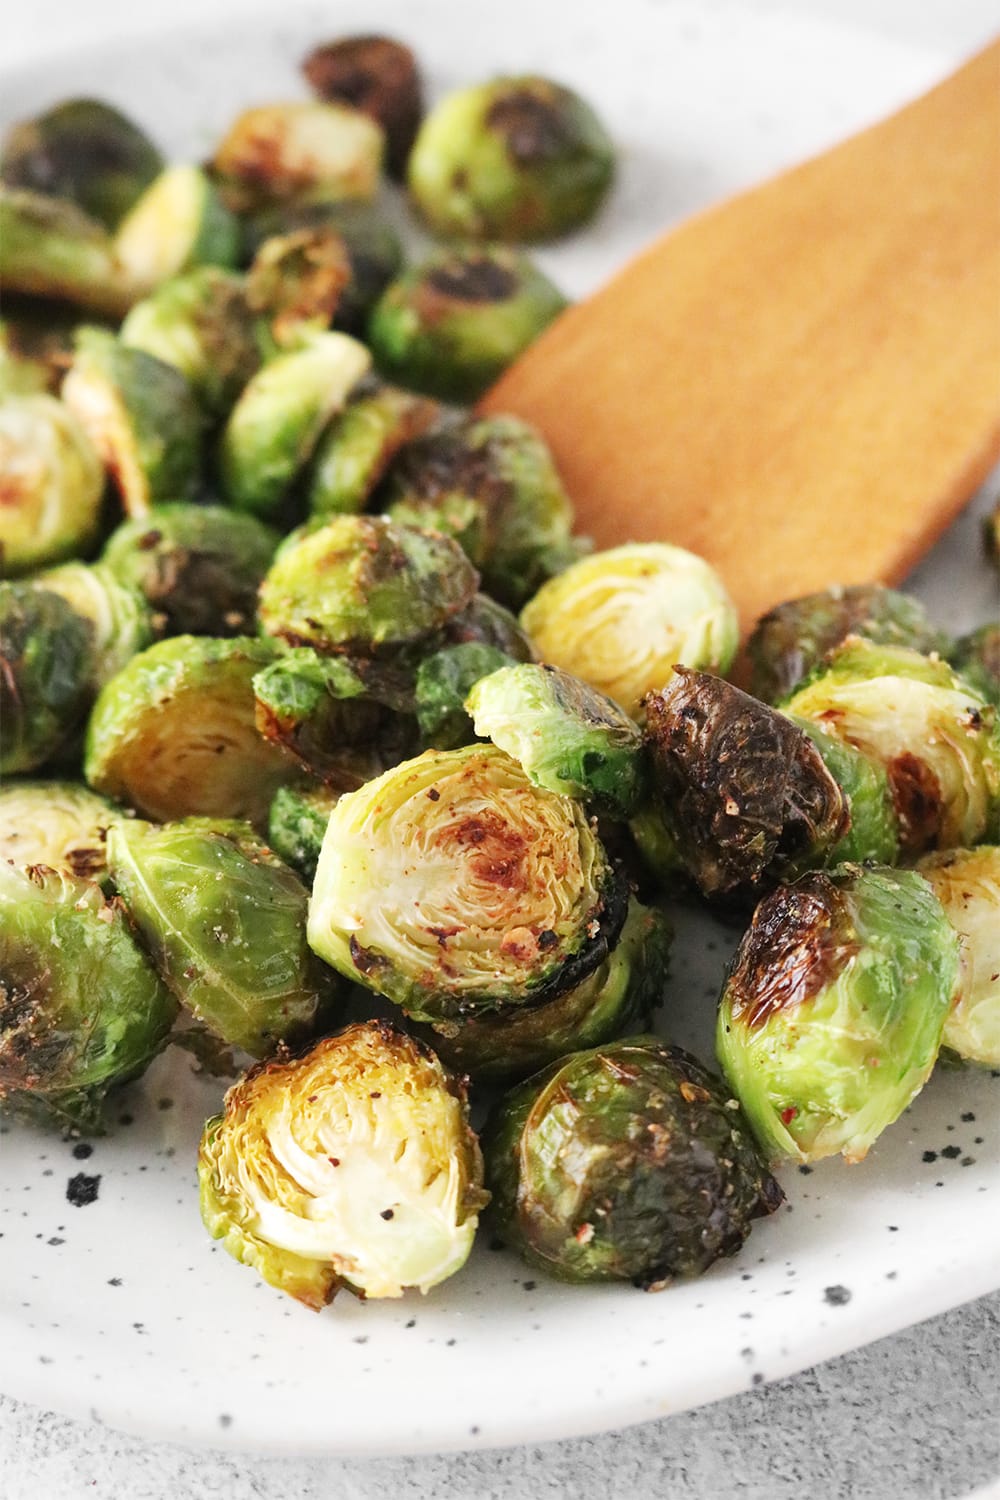 Roasted Brussels sprouts on a speckled white plate